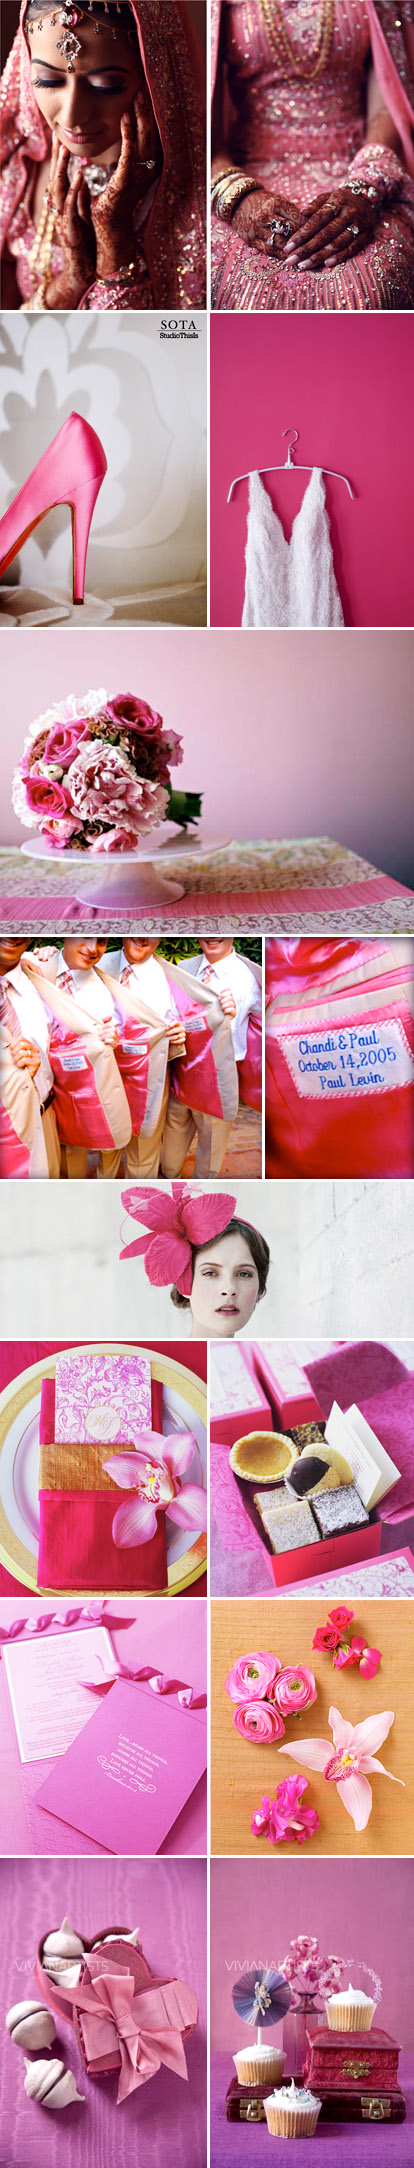 Fuchsia wedding color inspiration, wedding floral, decor and fashion in pink!